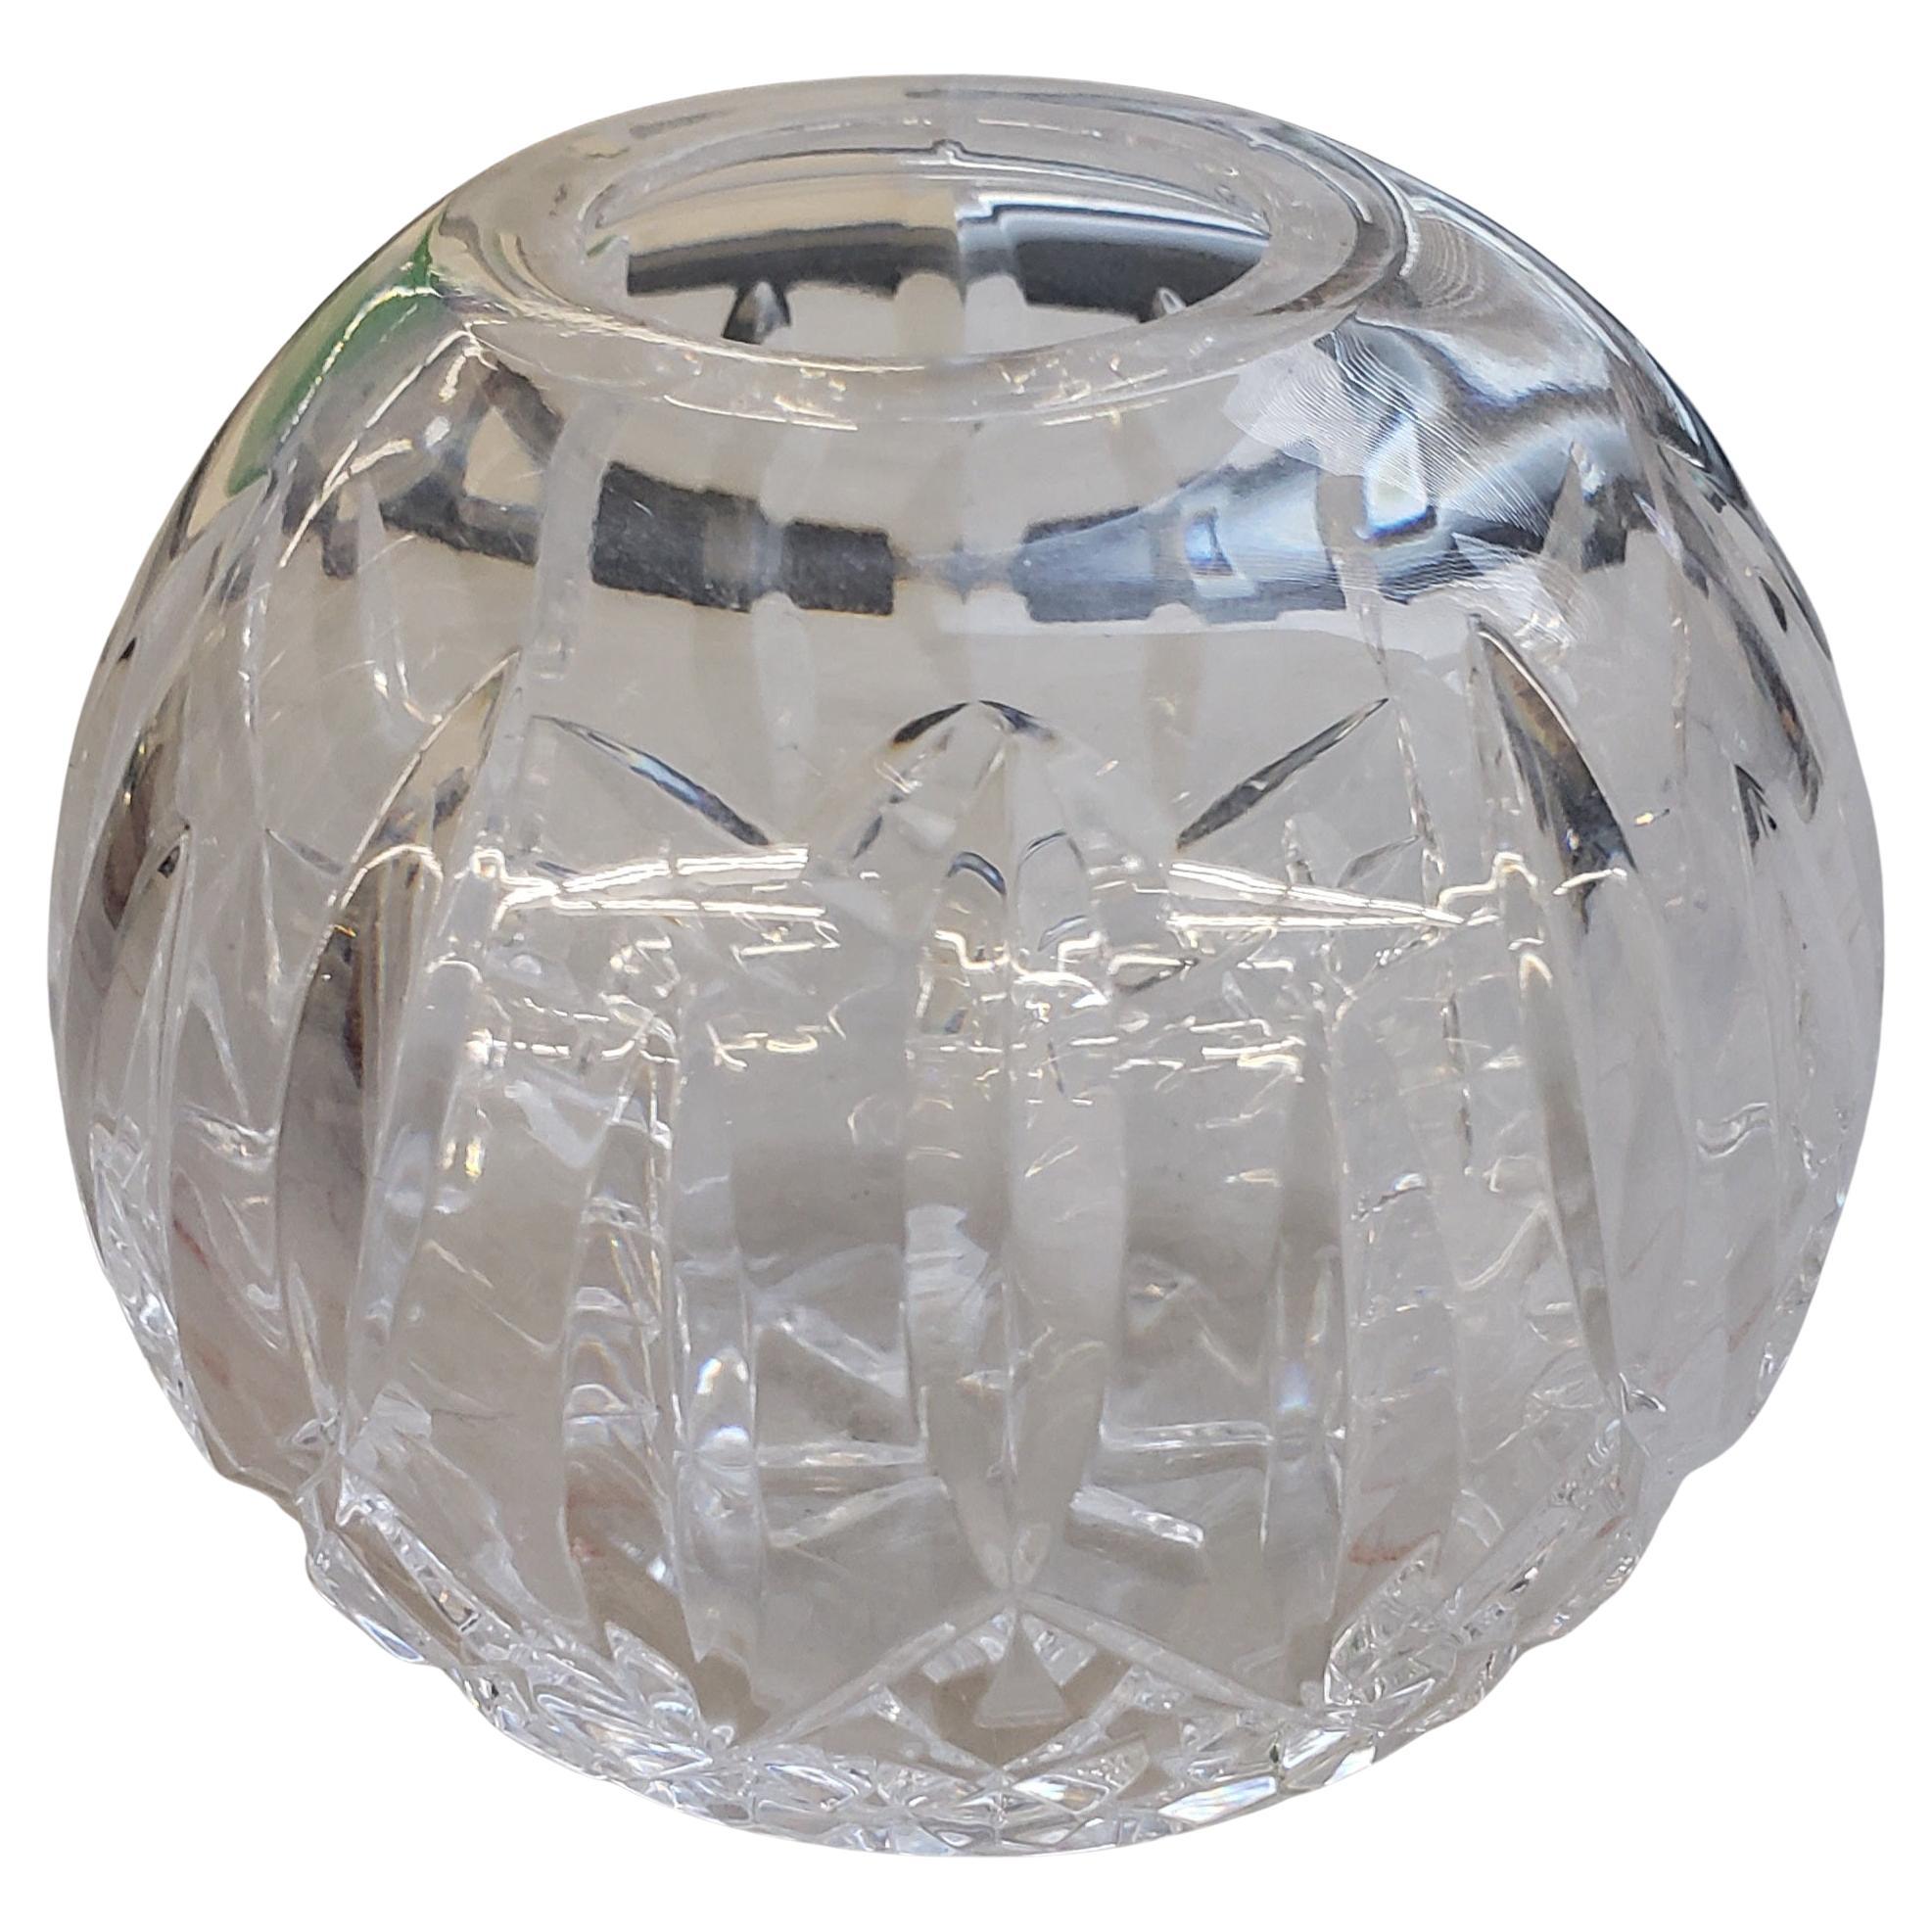 Original Waterford Cut Crystal Ball Candle Holder For Sale